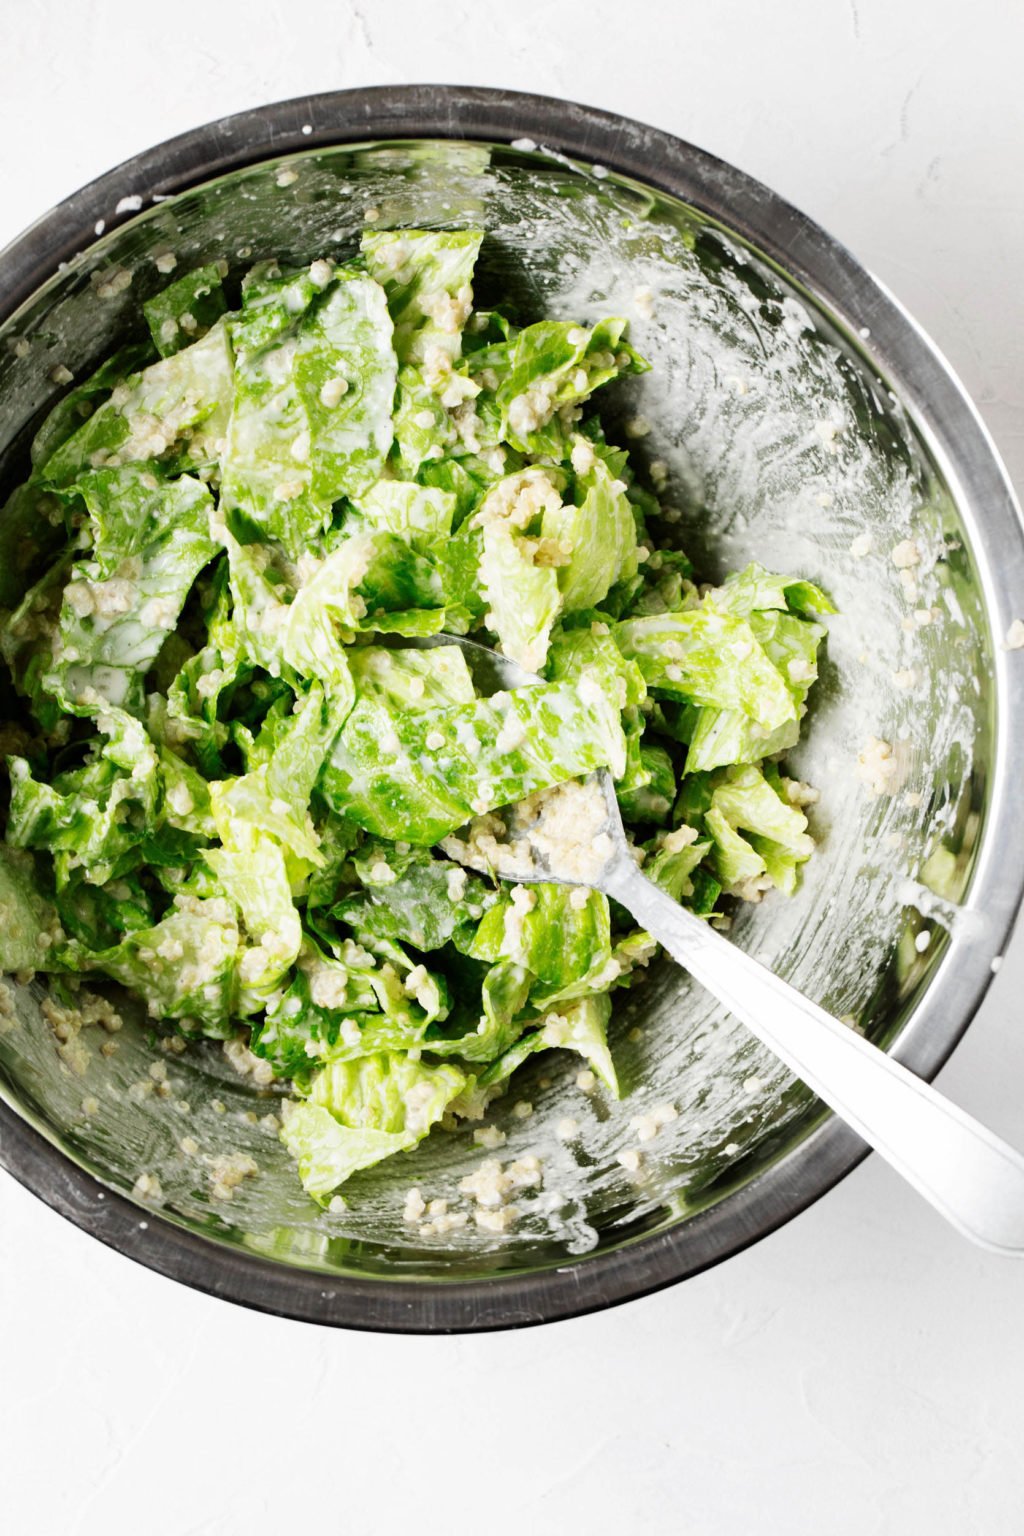 A large, metal mixing bowl is filled with romaine lettuce, which is being tossed with a creamy salad dressing.